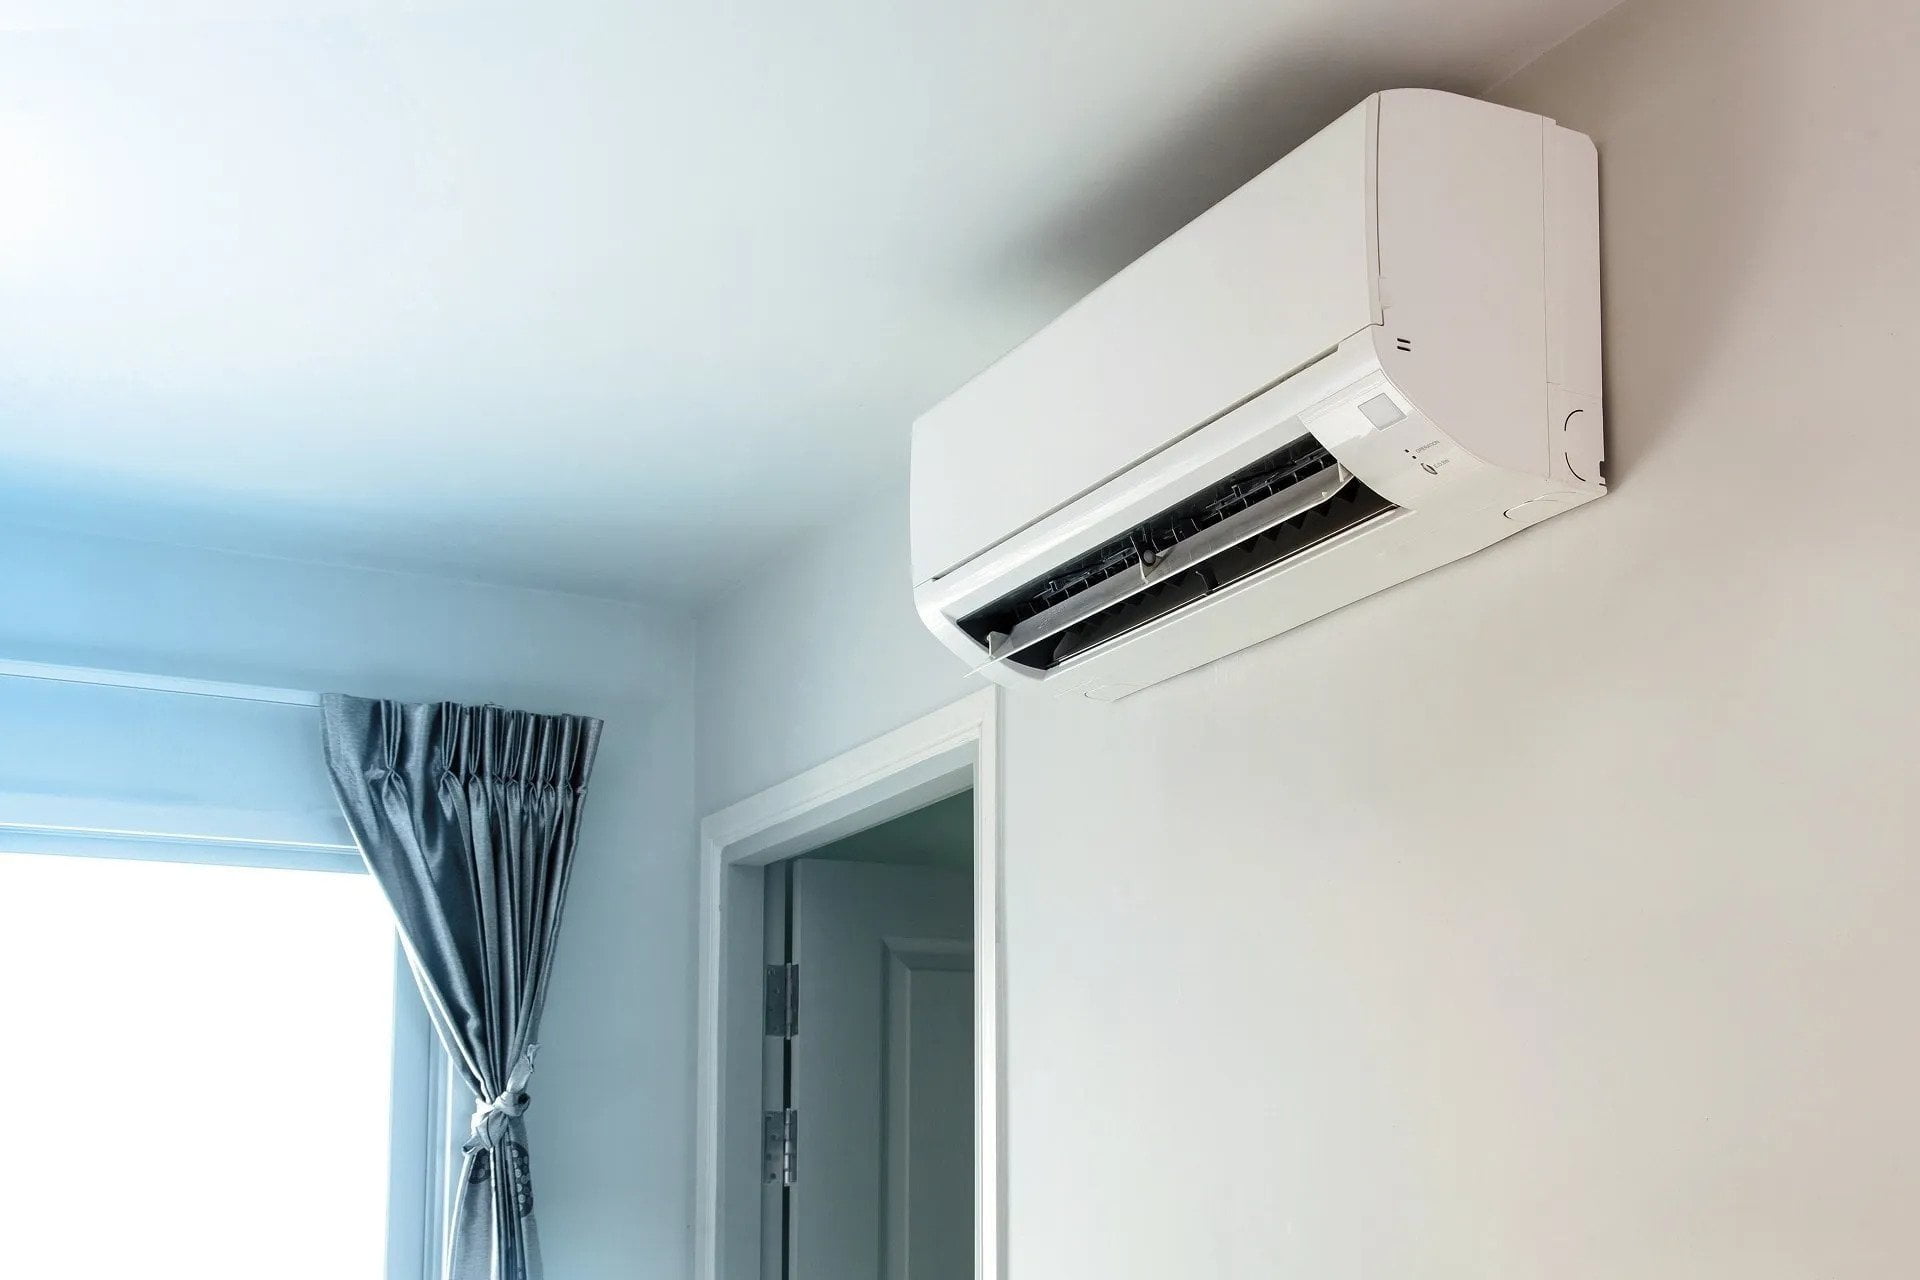 How to Use Air Conditioner Economically